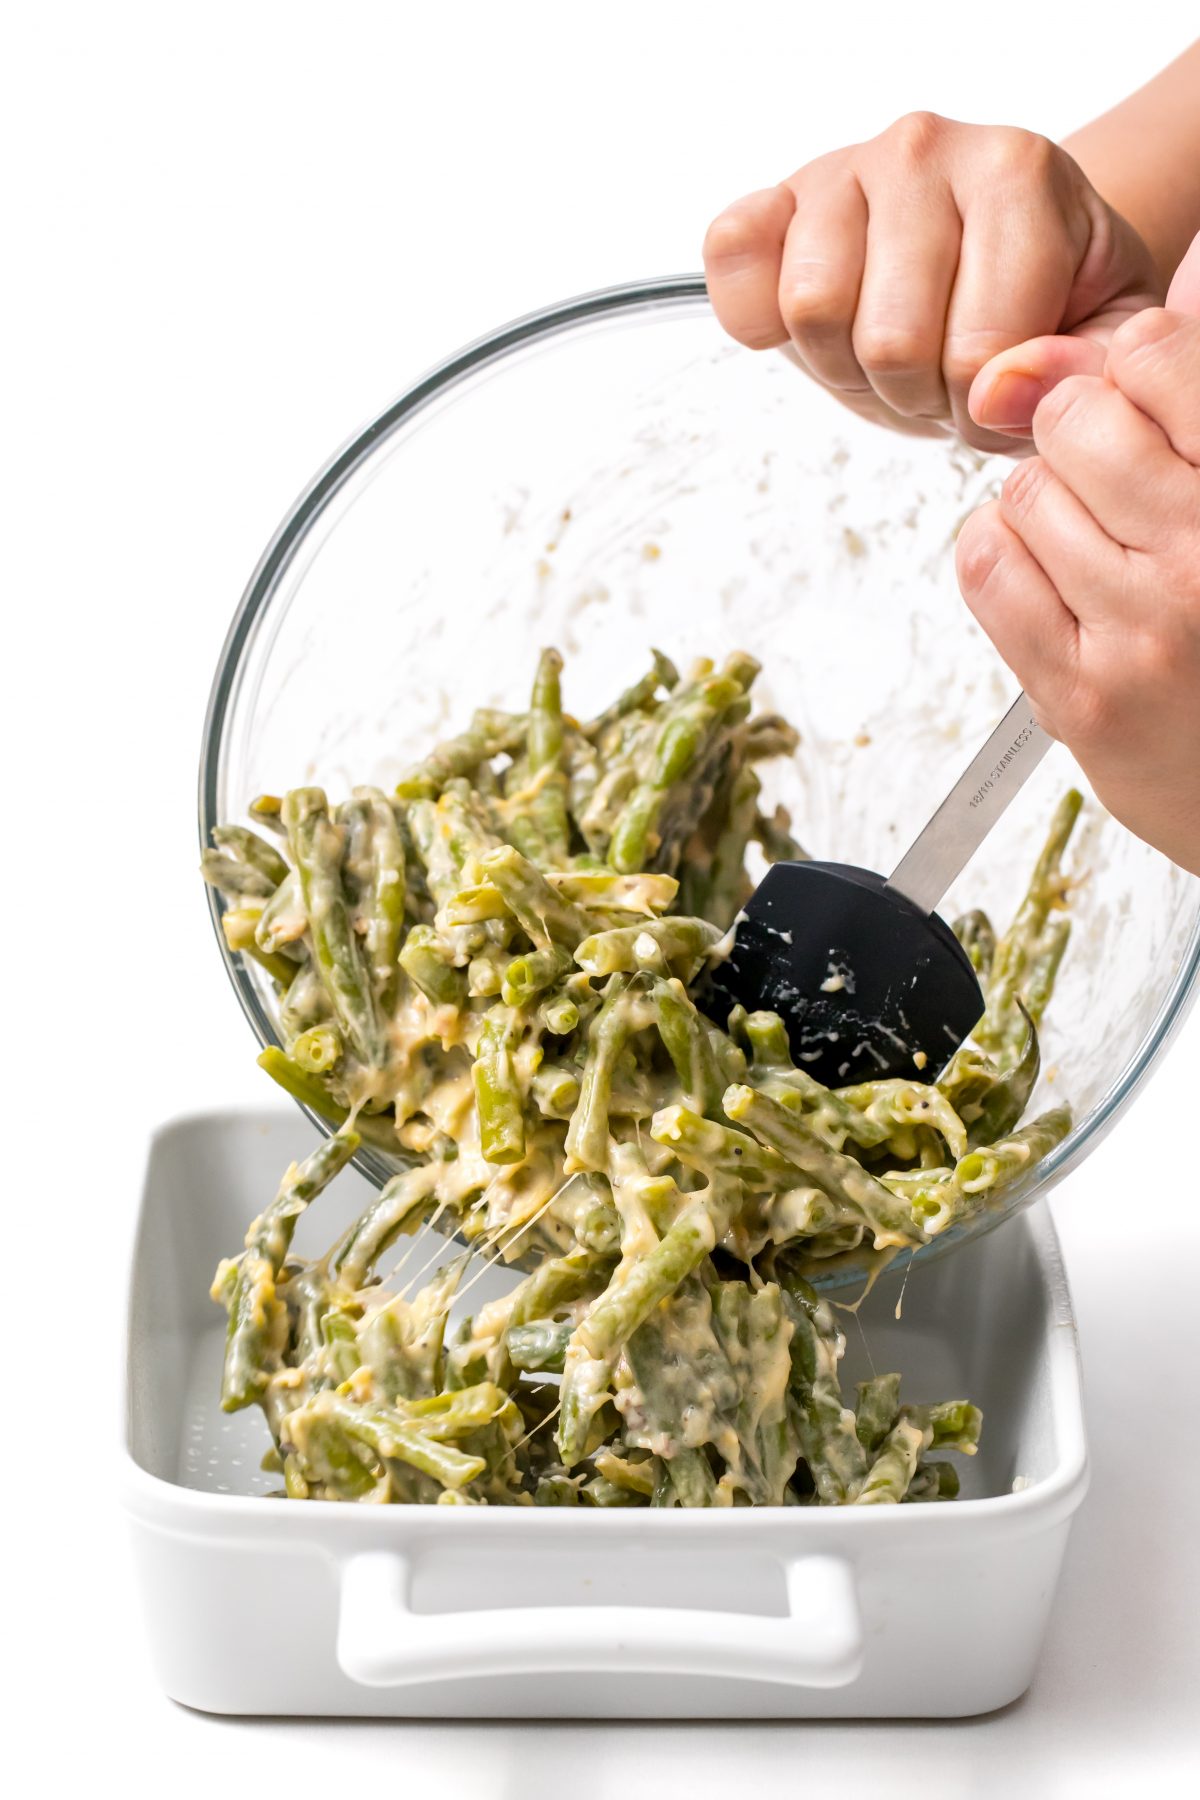 Transfer the green beans to a greased casserole dish.